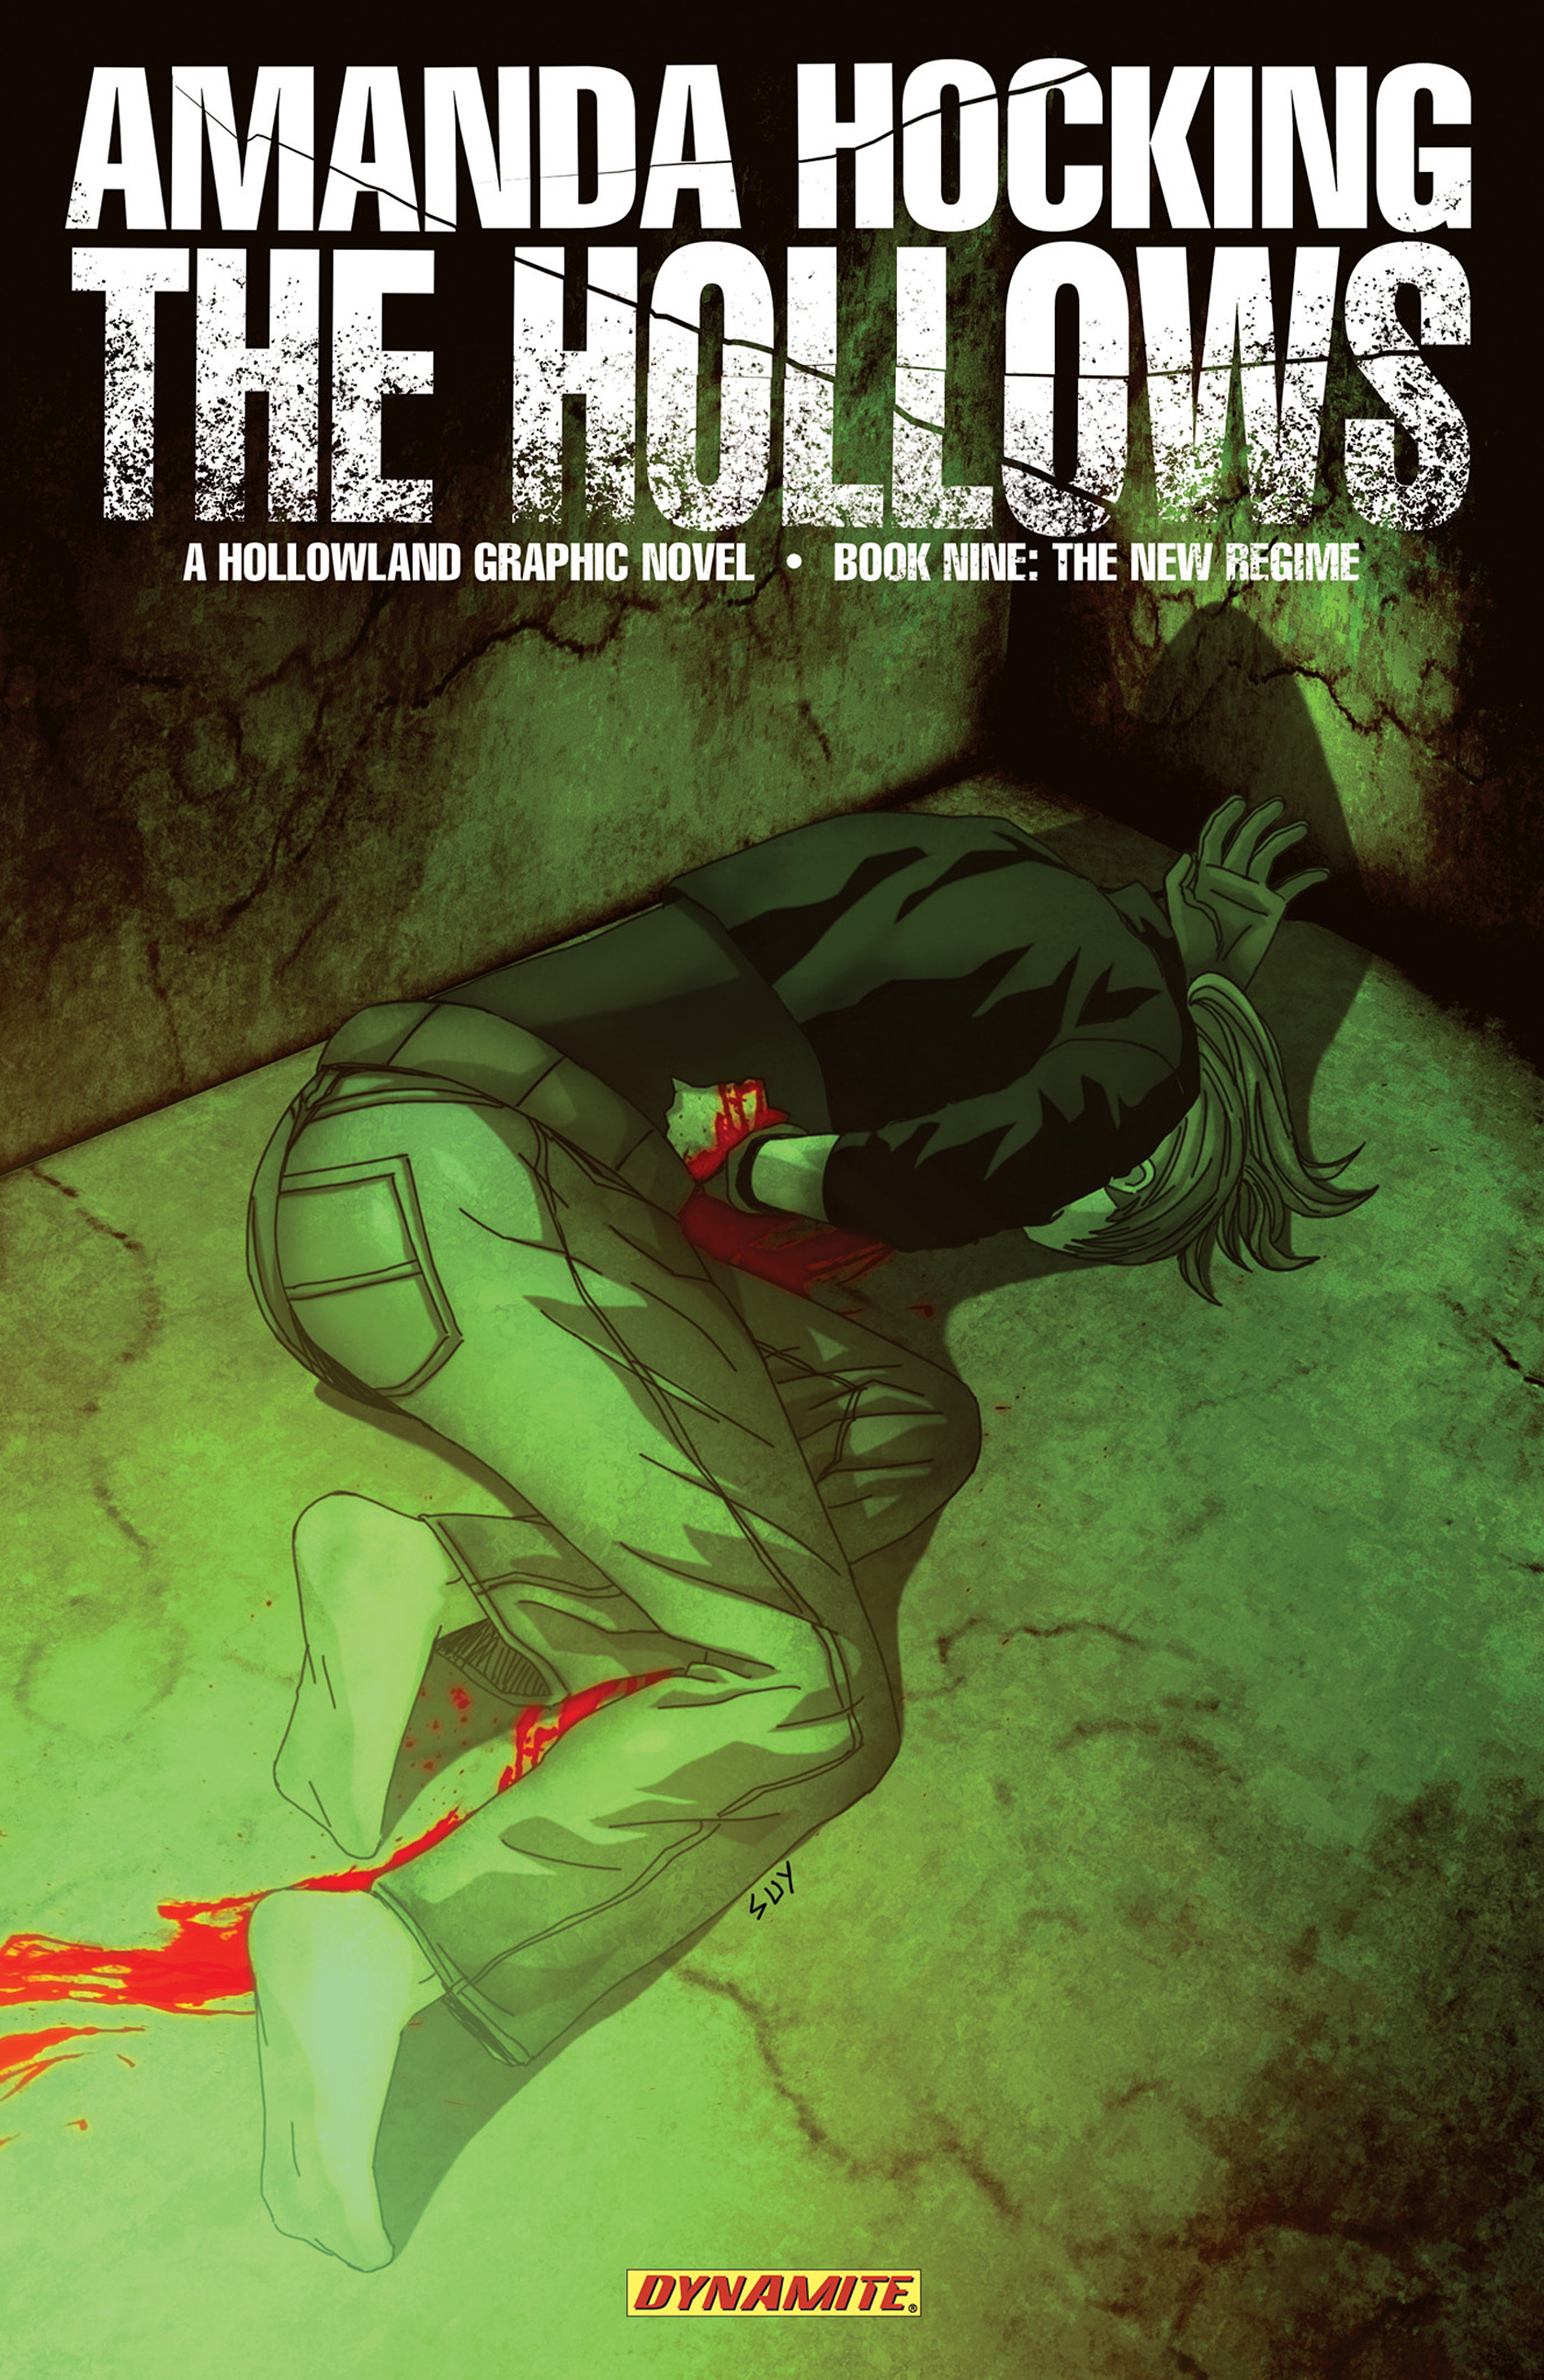 Read online Amanda Hocking's The Hollows: A Hollowland Graphic Novel comic -  Issue #9 - 1